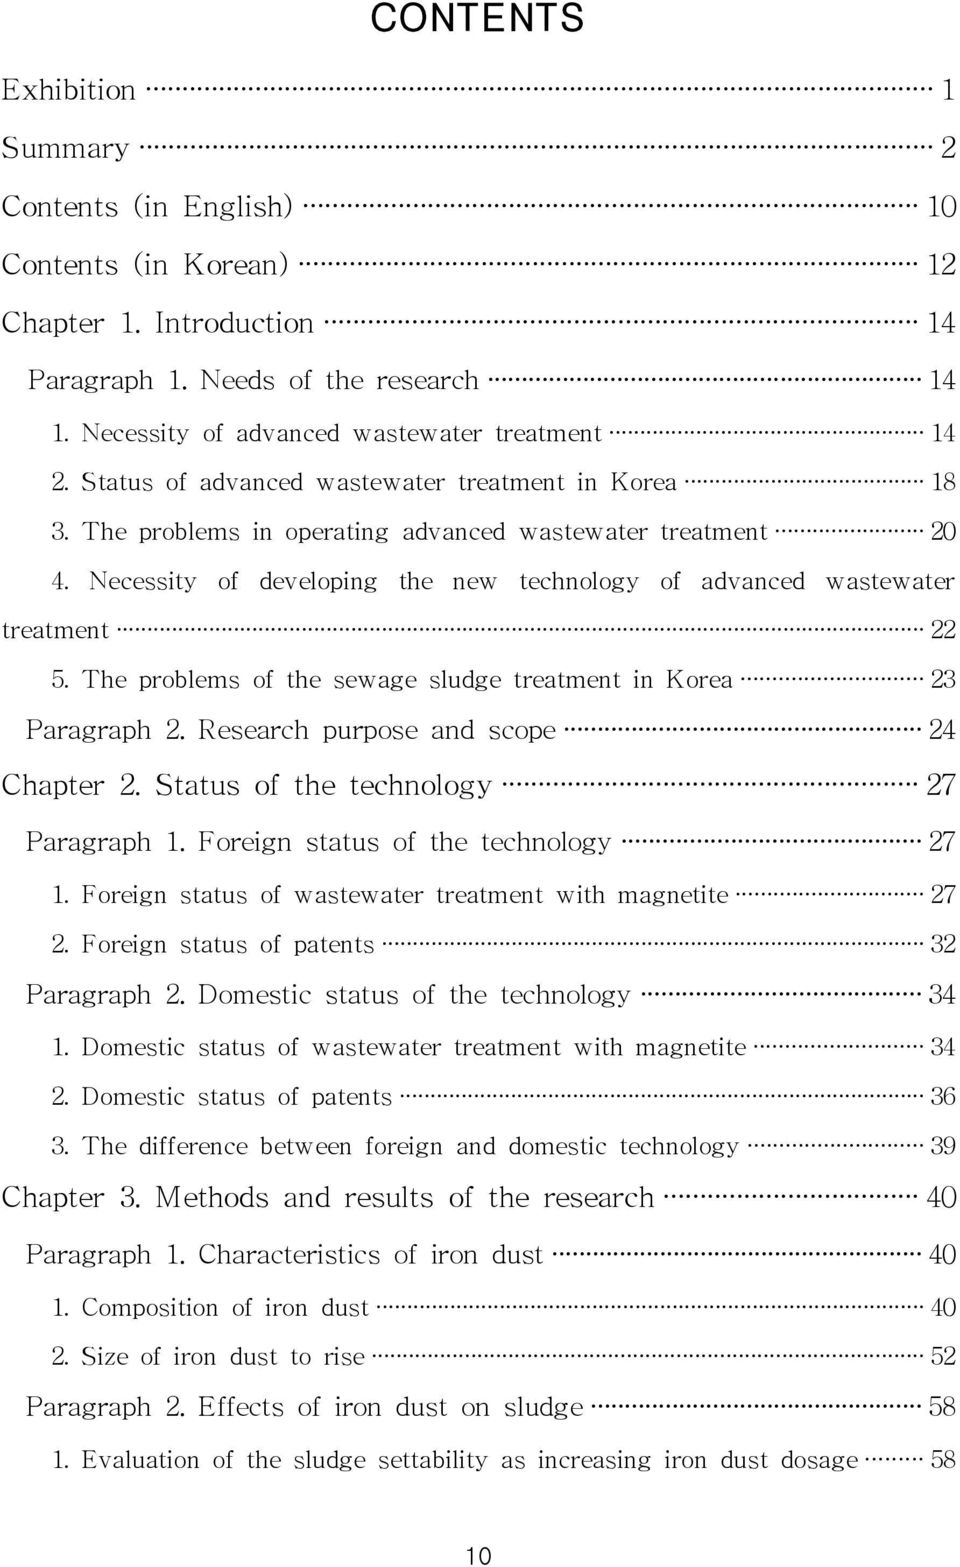 The problems of the sewage sludge treatment in Korea 23 Paragraph 2. Research purpose and scope 24 Chapter 2. Status of the technology 27 Paragraph 1. Foreign status of the technology 27 1.